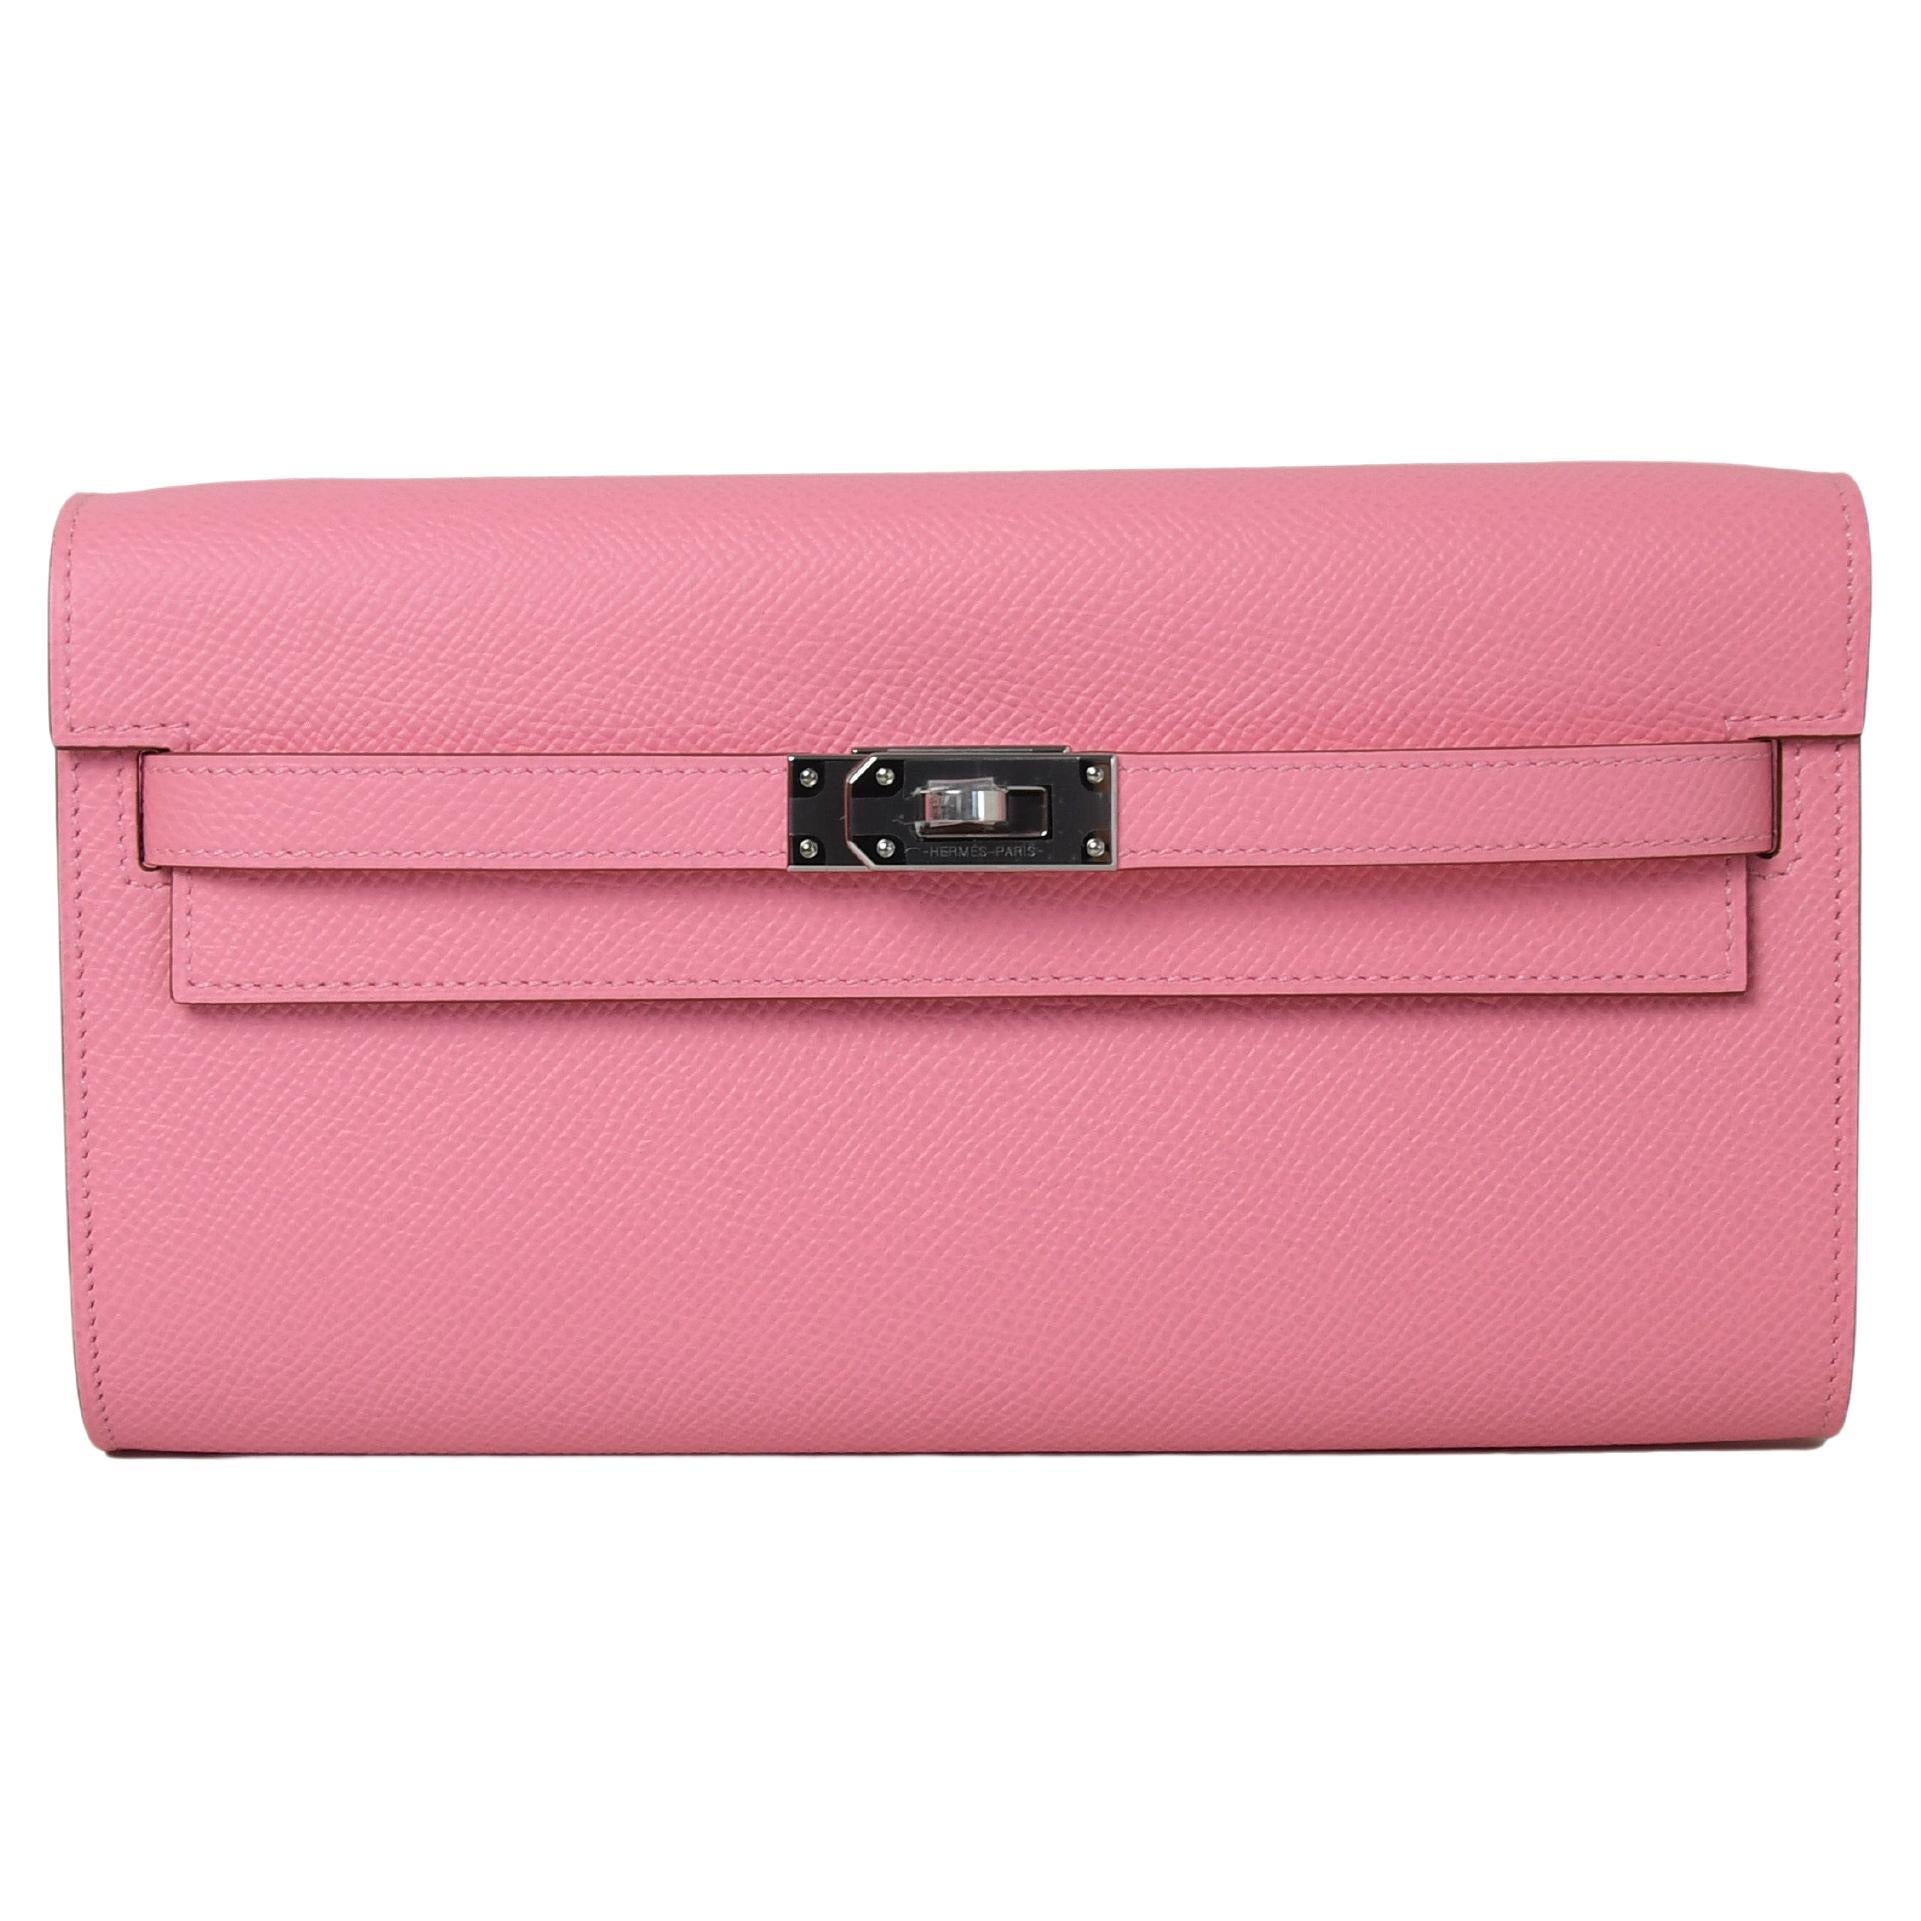 Hermes Kelly To Go Palladium Hardware Rose Confetti For Sale